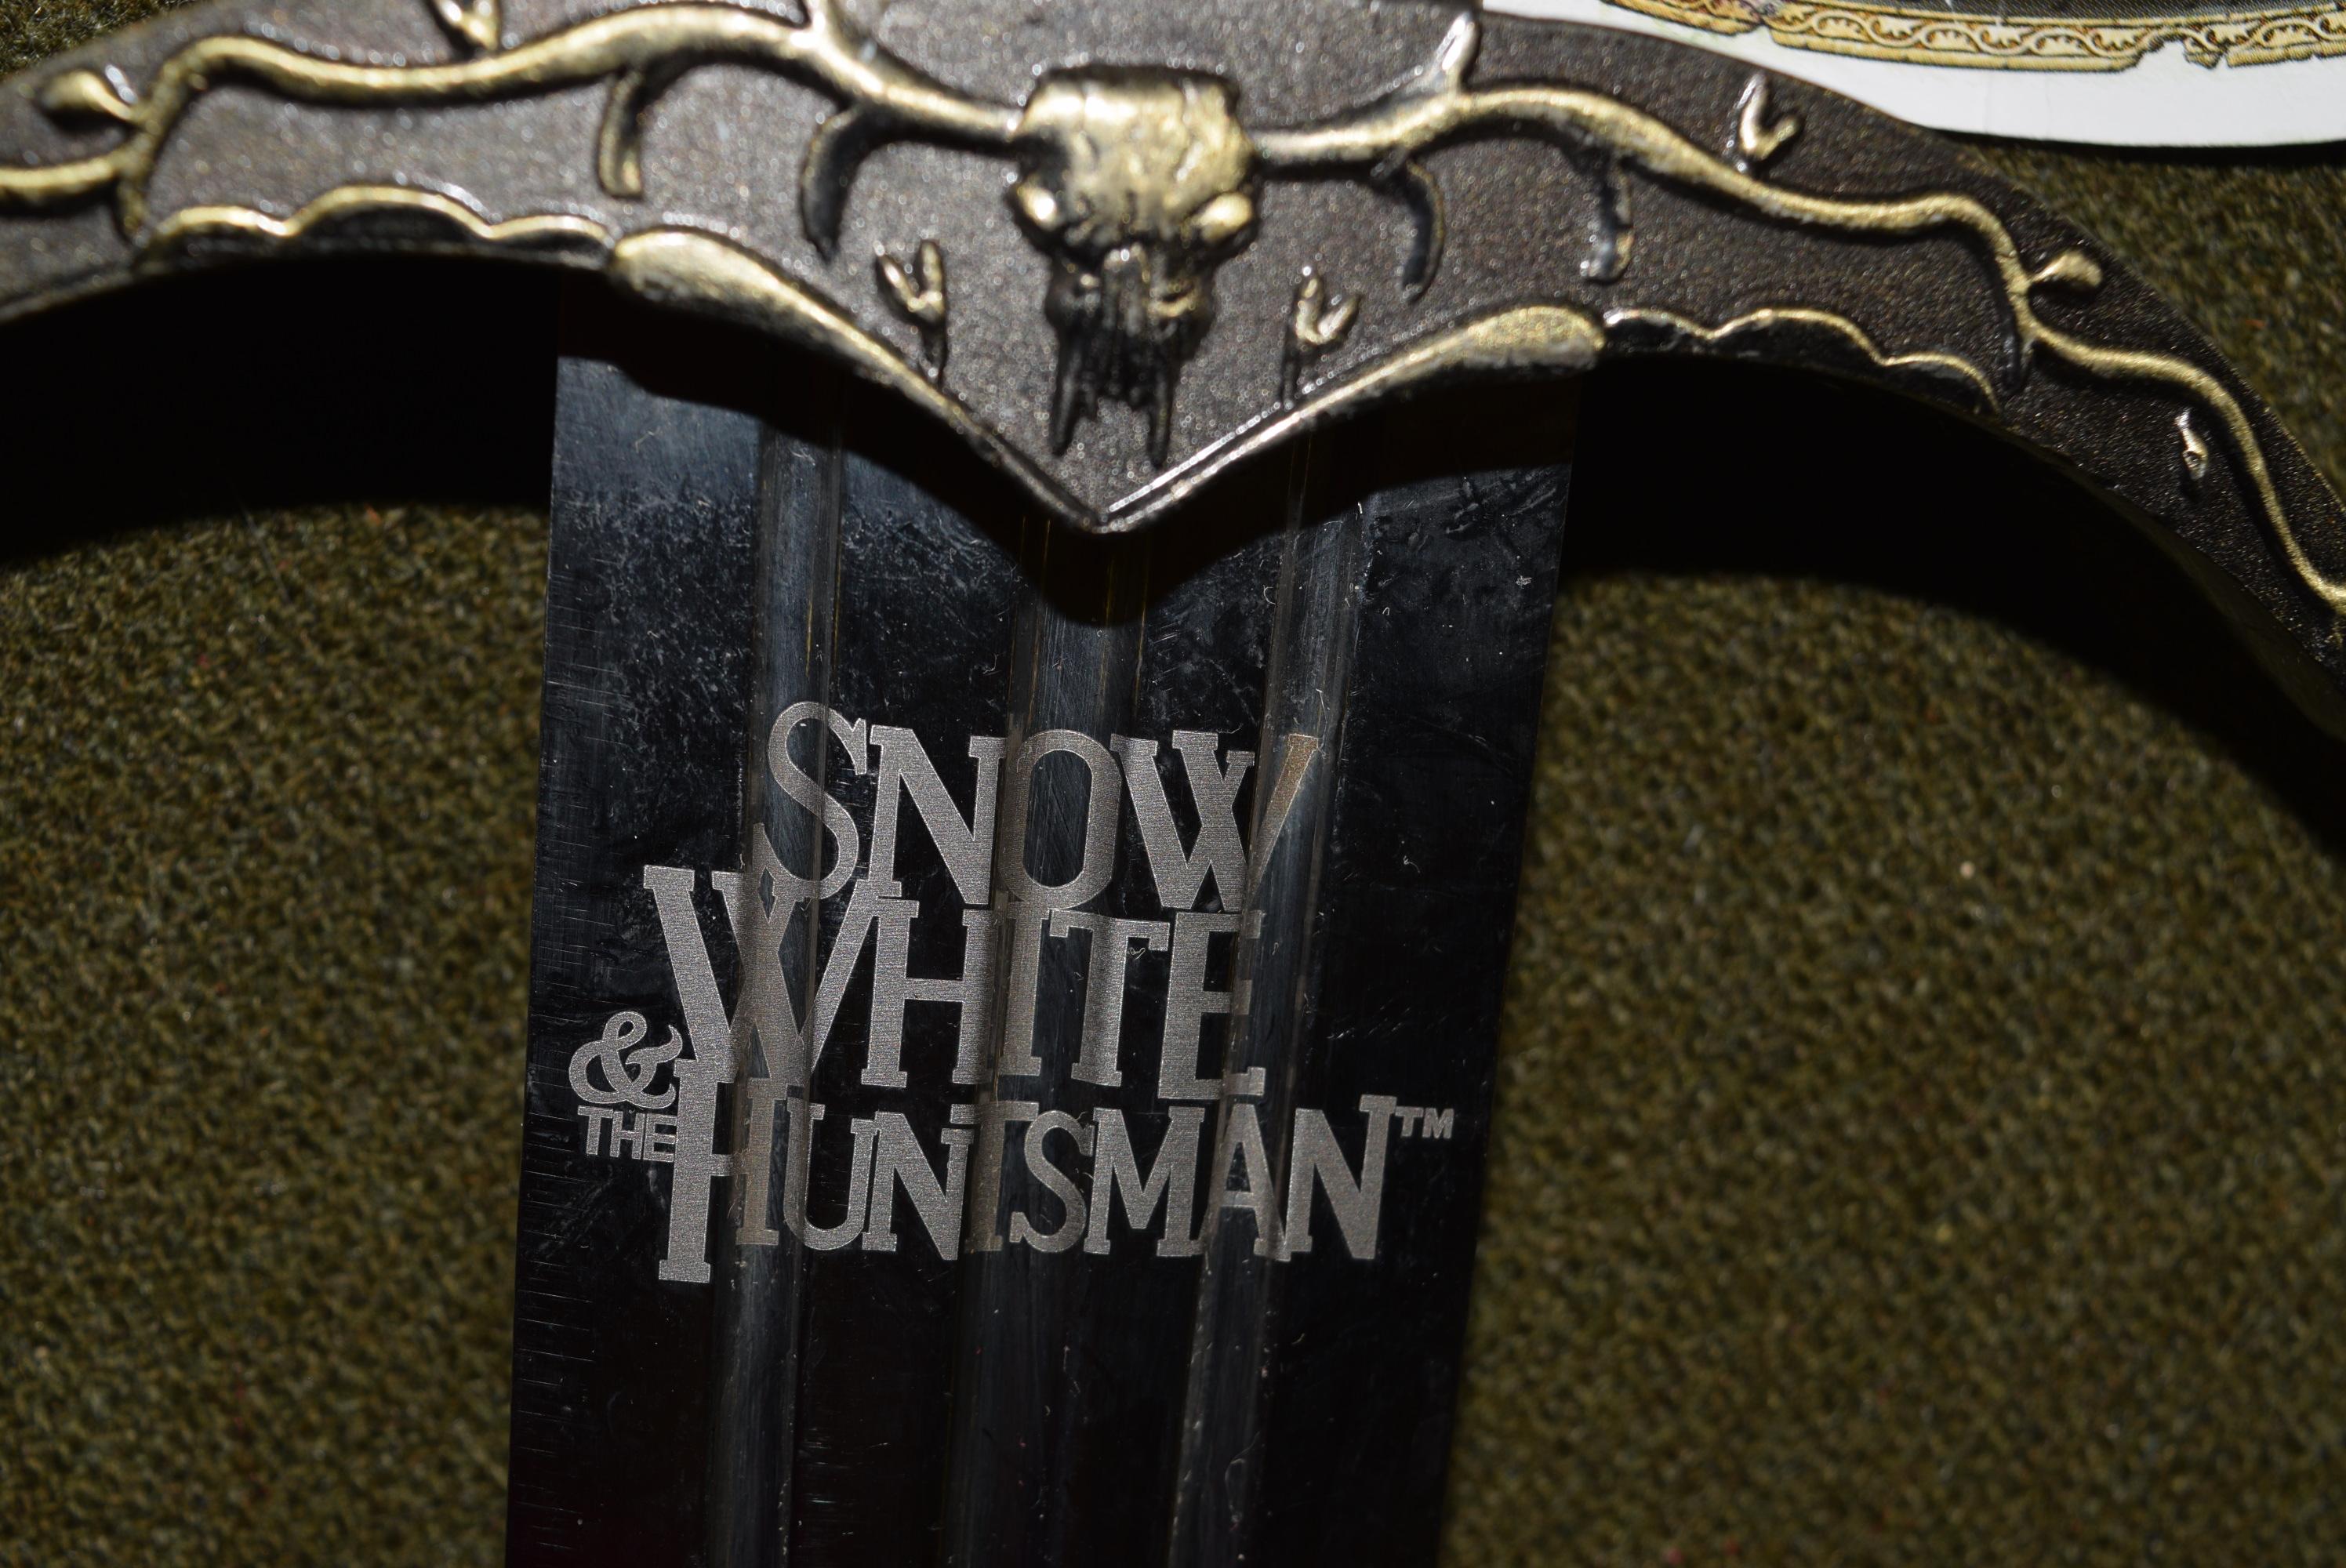 SNOW WHITE AND THE HUNTSMAN SWORD!